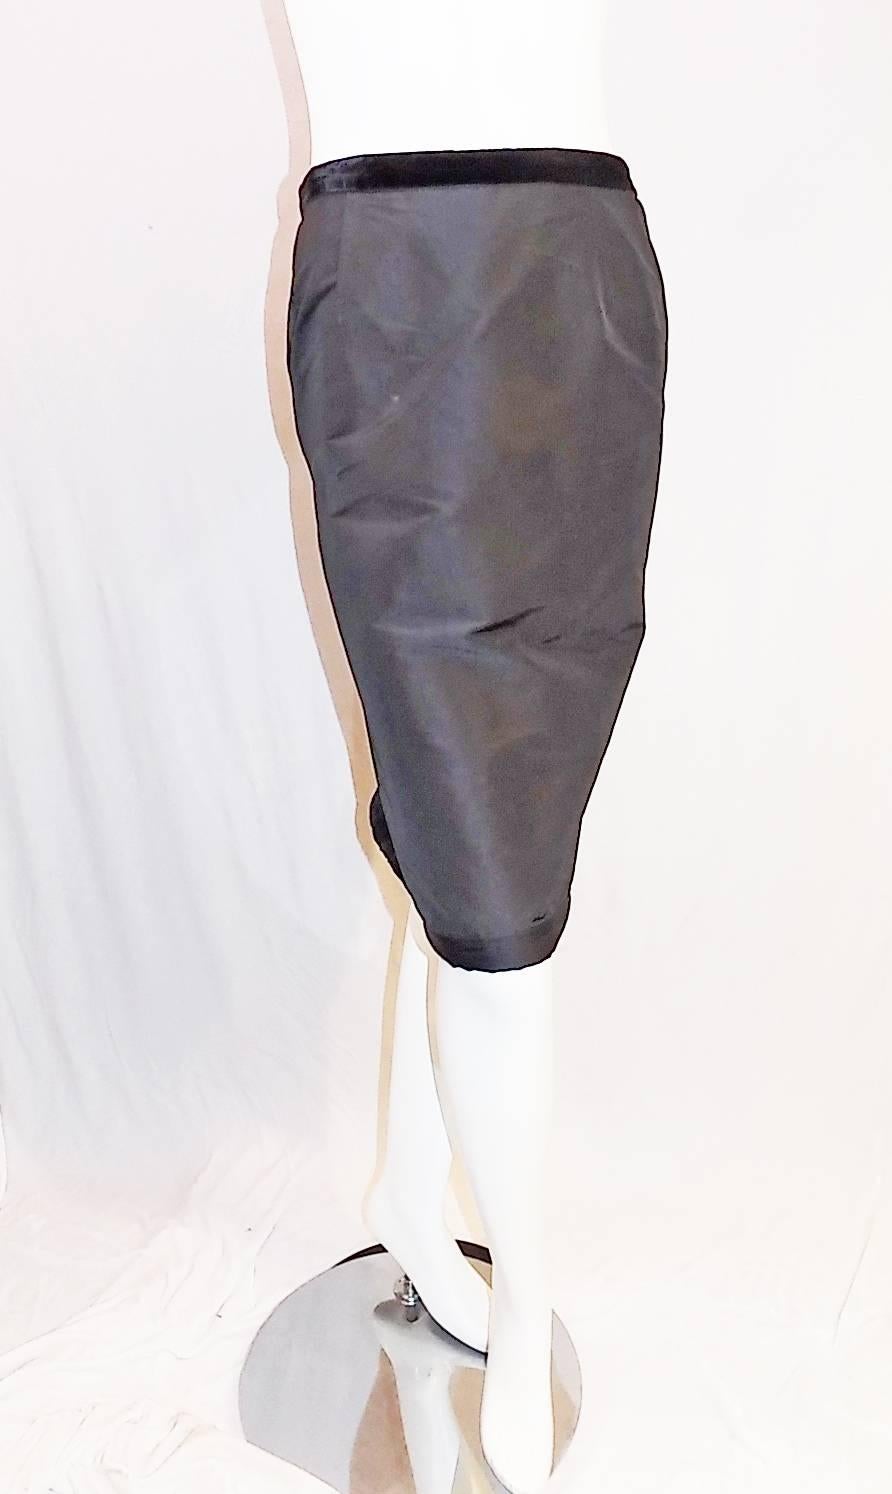 Fabulous $1275 black silk Lanvin evening skirt. One inch velvet belt. Pencil style with one 101/2 inch padded hemline detail. Absolutely gorgeous. Collection 2006. Classic Timeless piece. Size 6. Waist 28